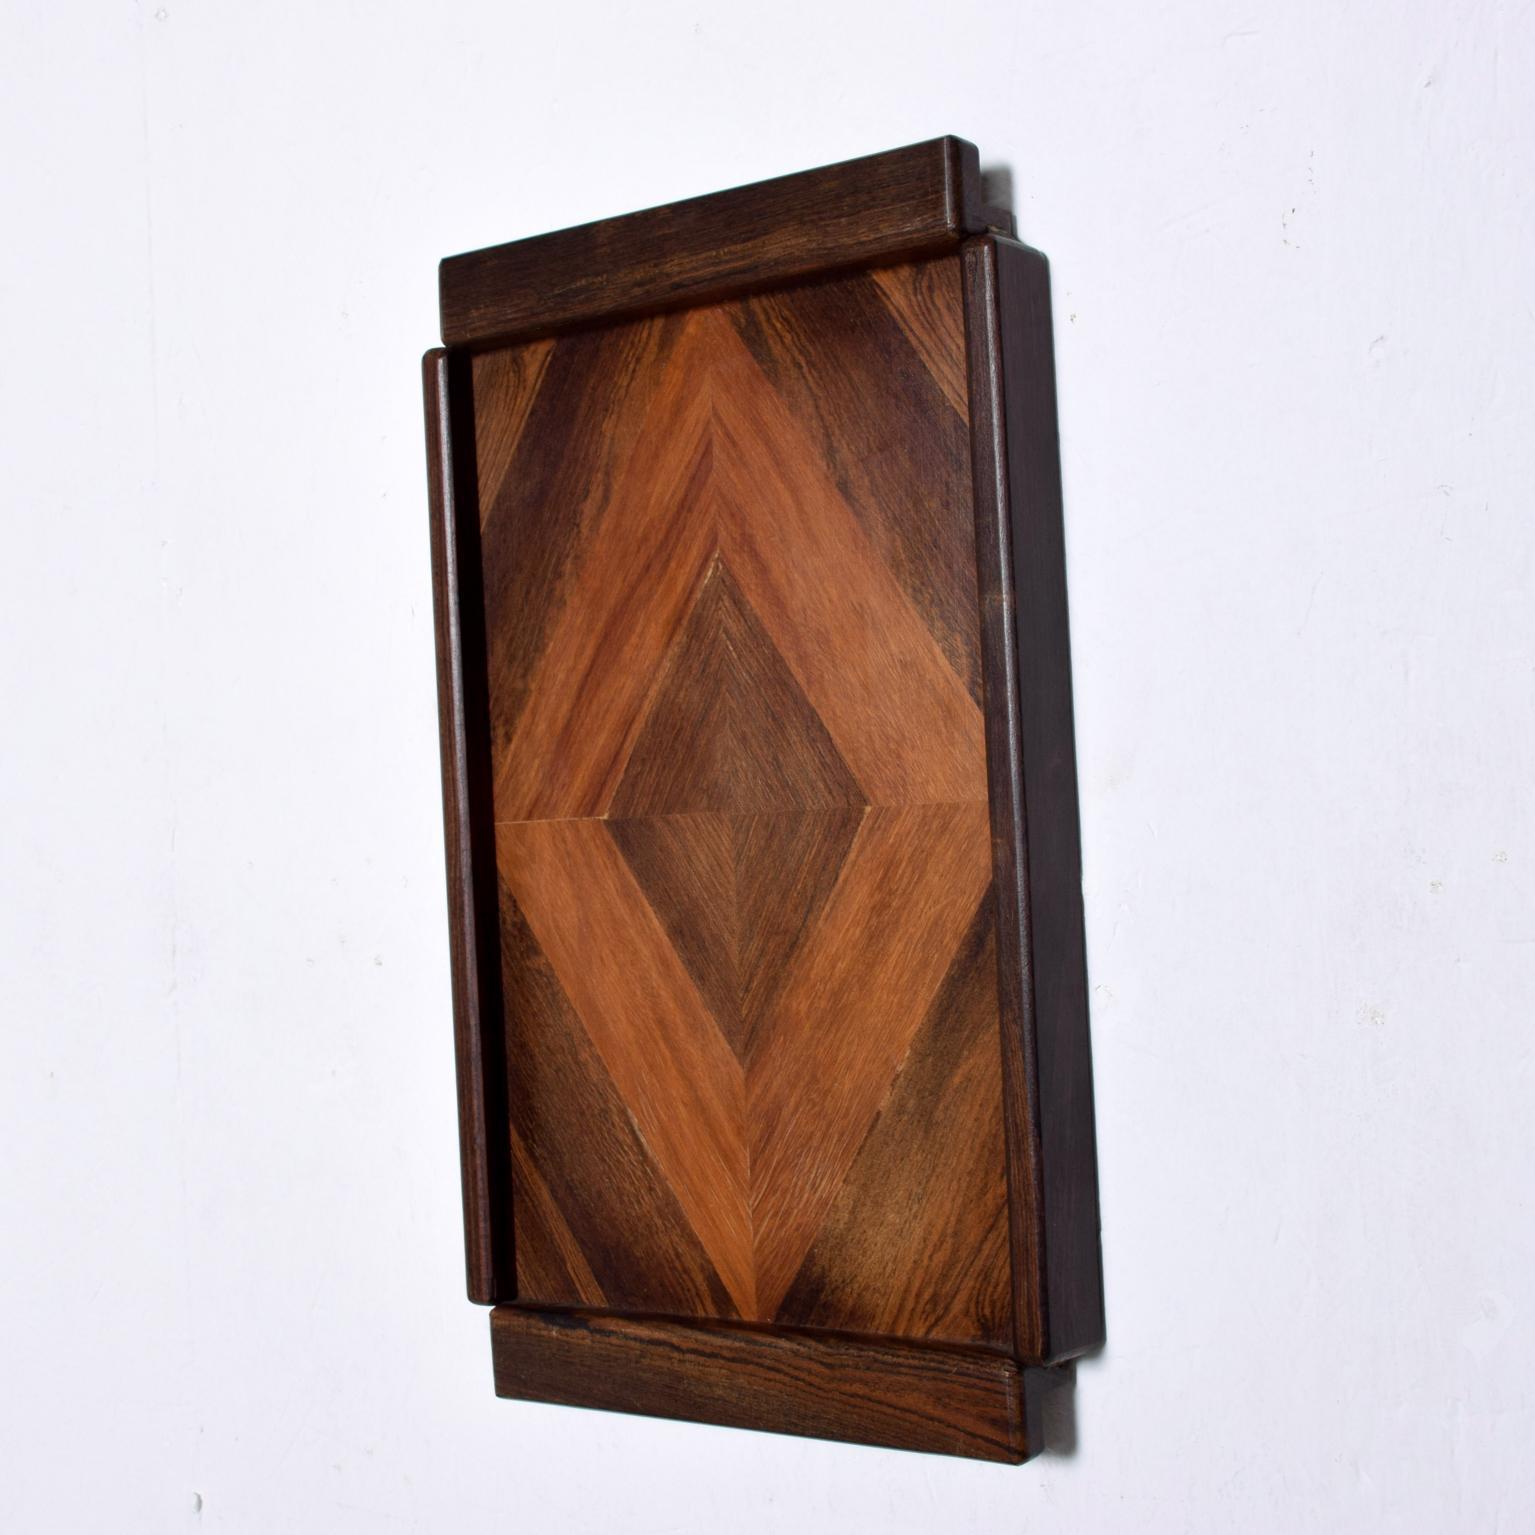 We are pleased to offer for your consideration a Medium service tray by Don S Shoemaker. Beautiful geometric woodwork with exotic woods. A small hole on the back of the tray allows for easy hanging onto the wall. Retains label from the maker on the